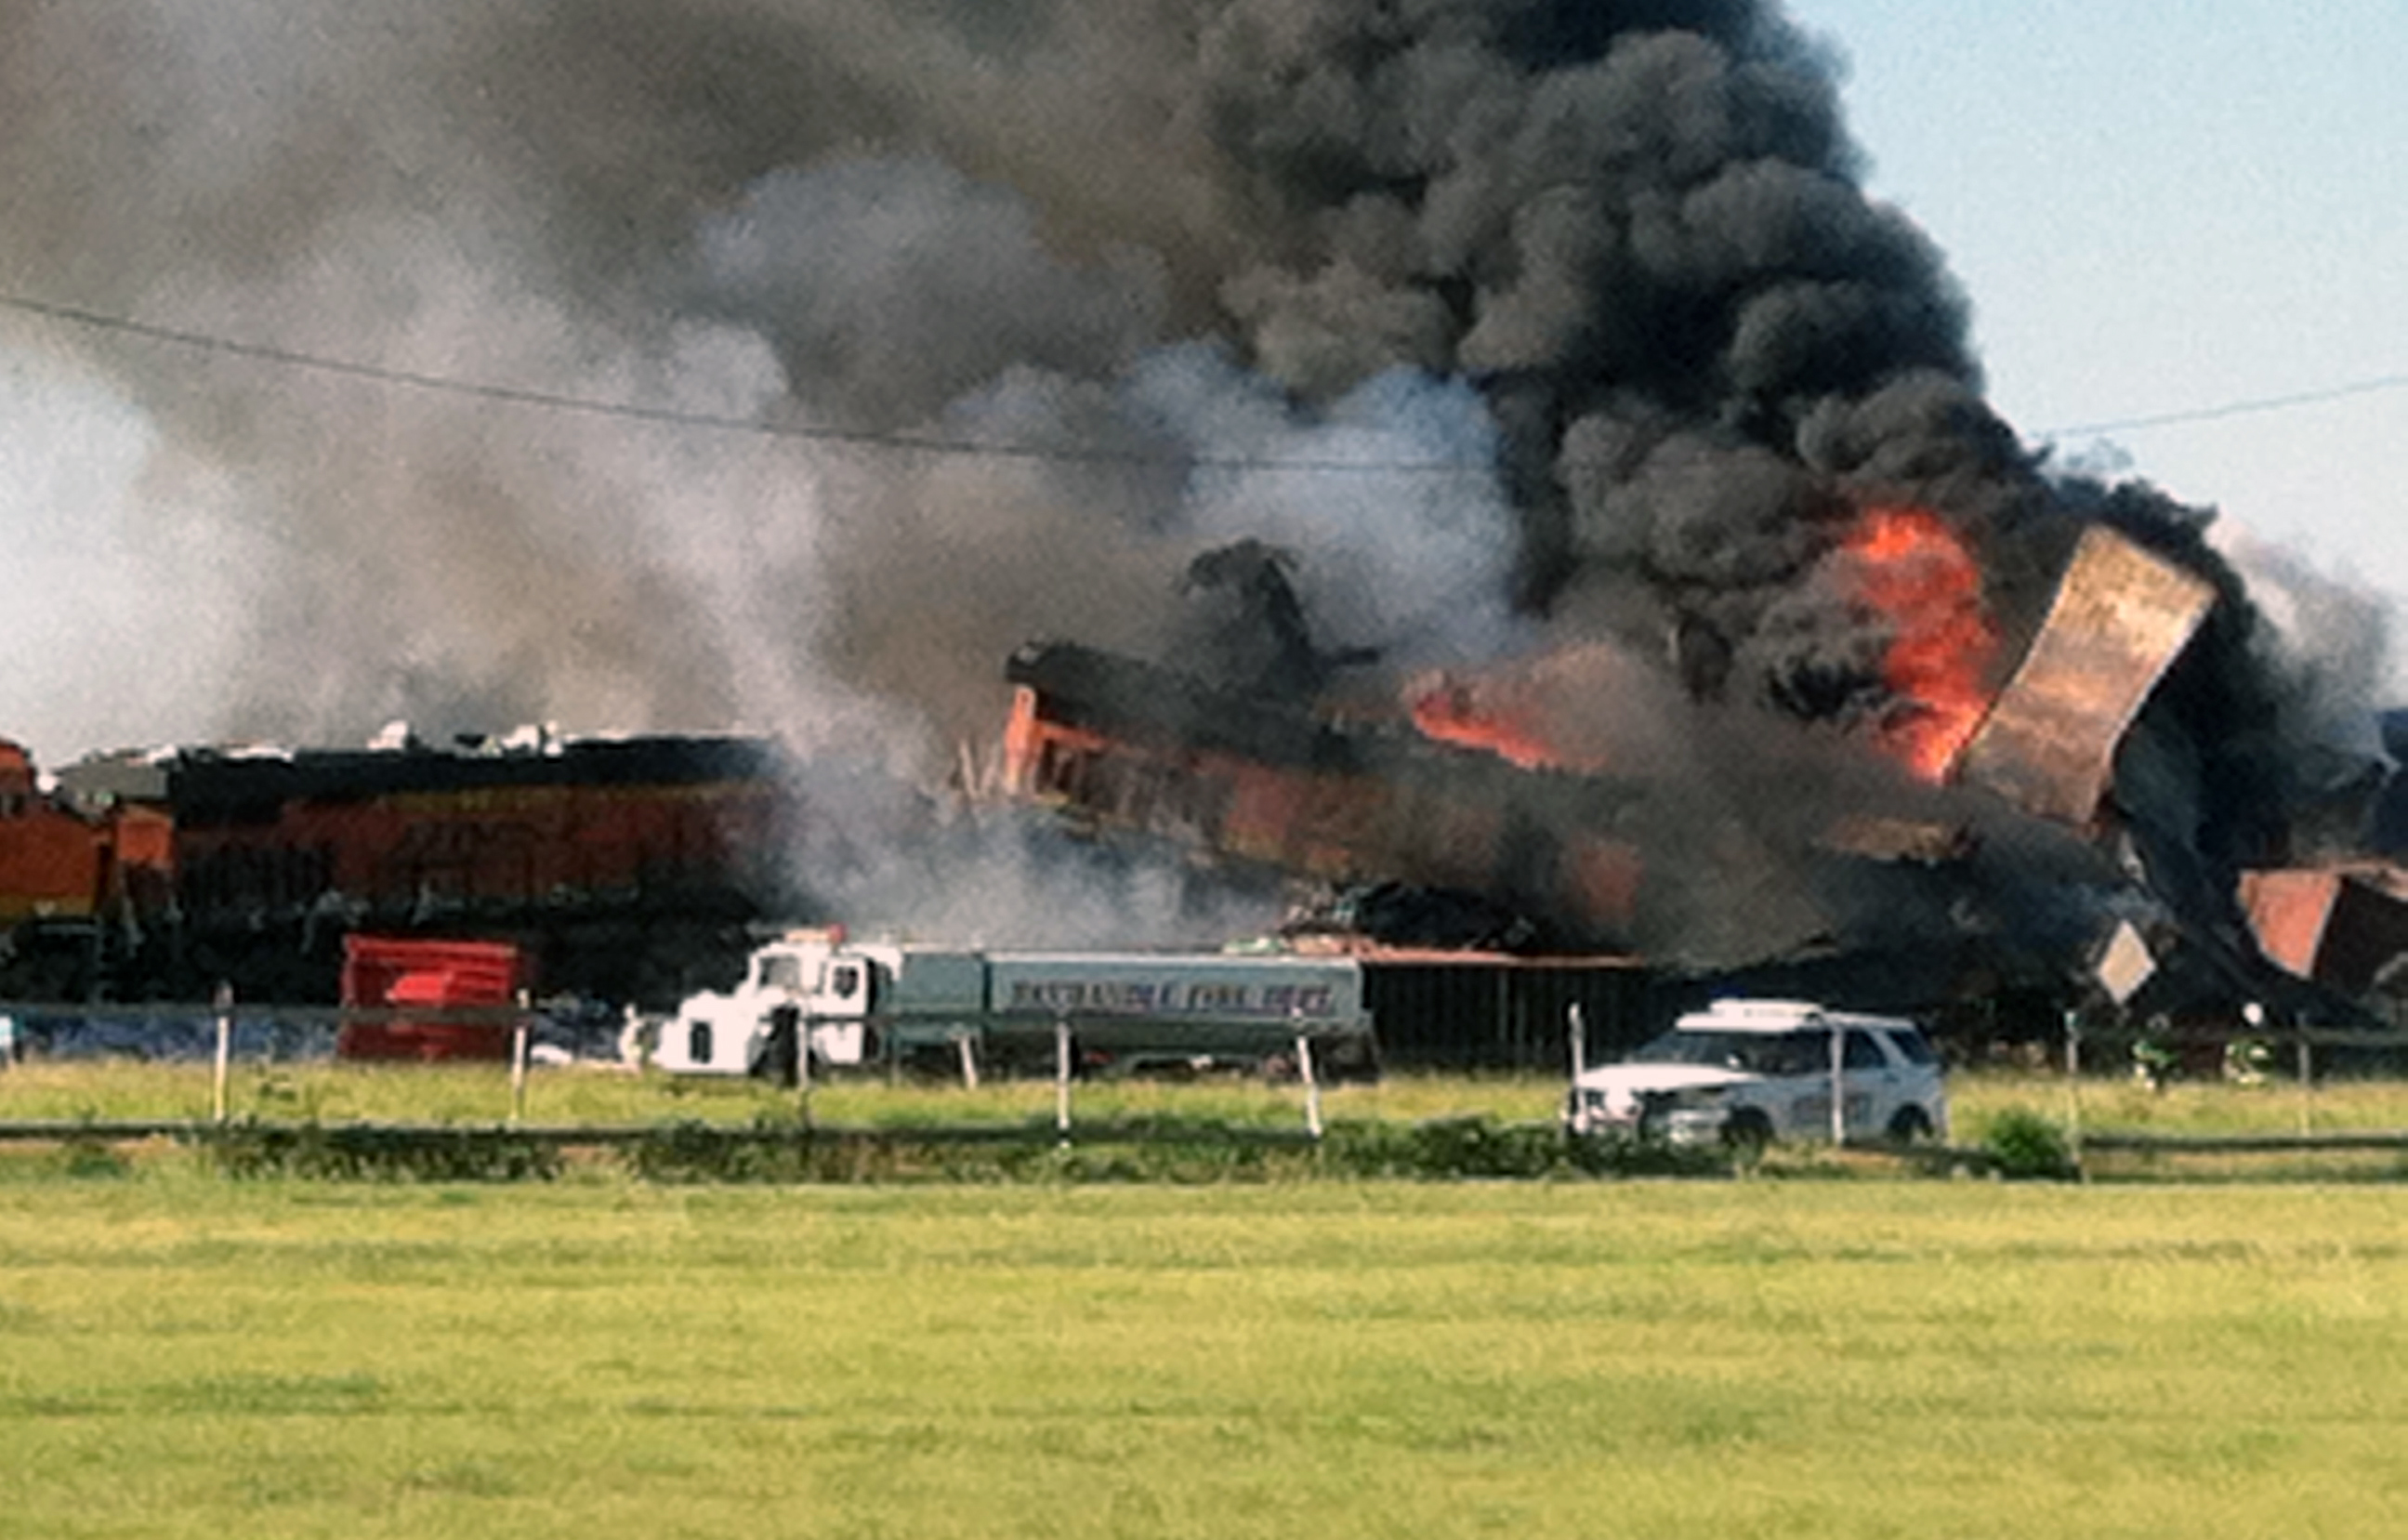 PHOTO: Ttwo freight trains burn after they collided and derailed near Panhandle, Texas, June 28, 2016.